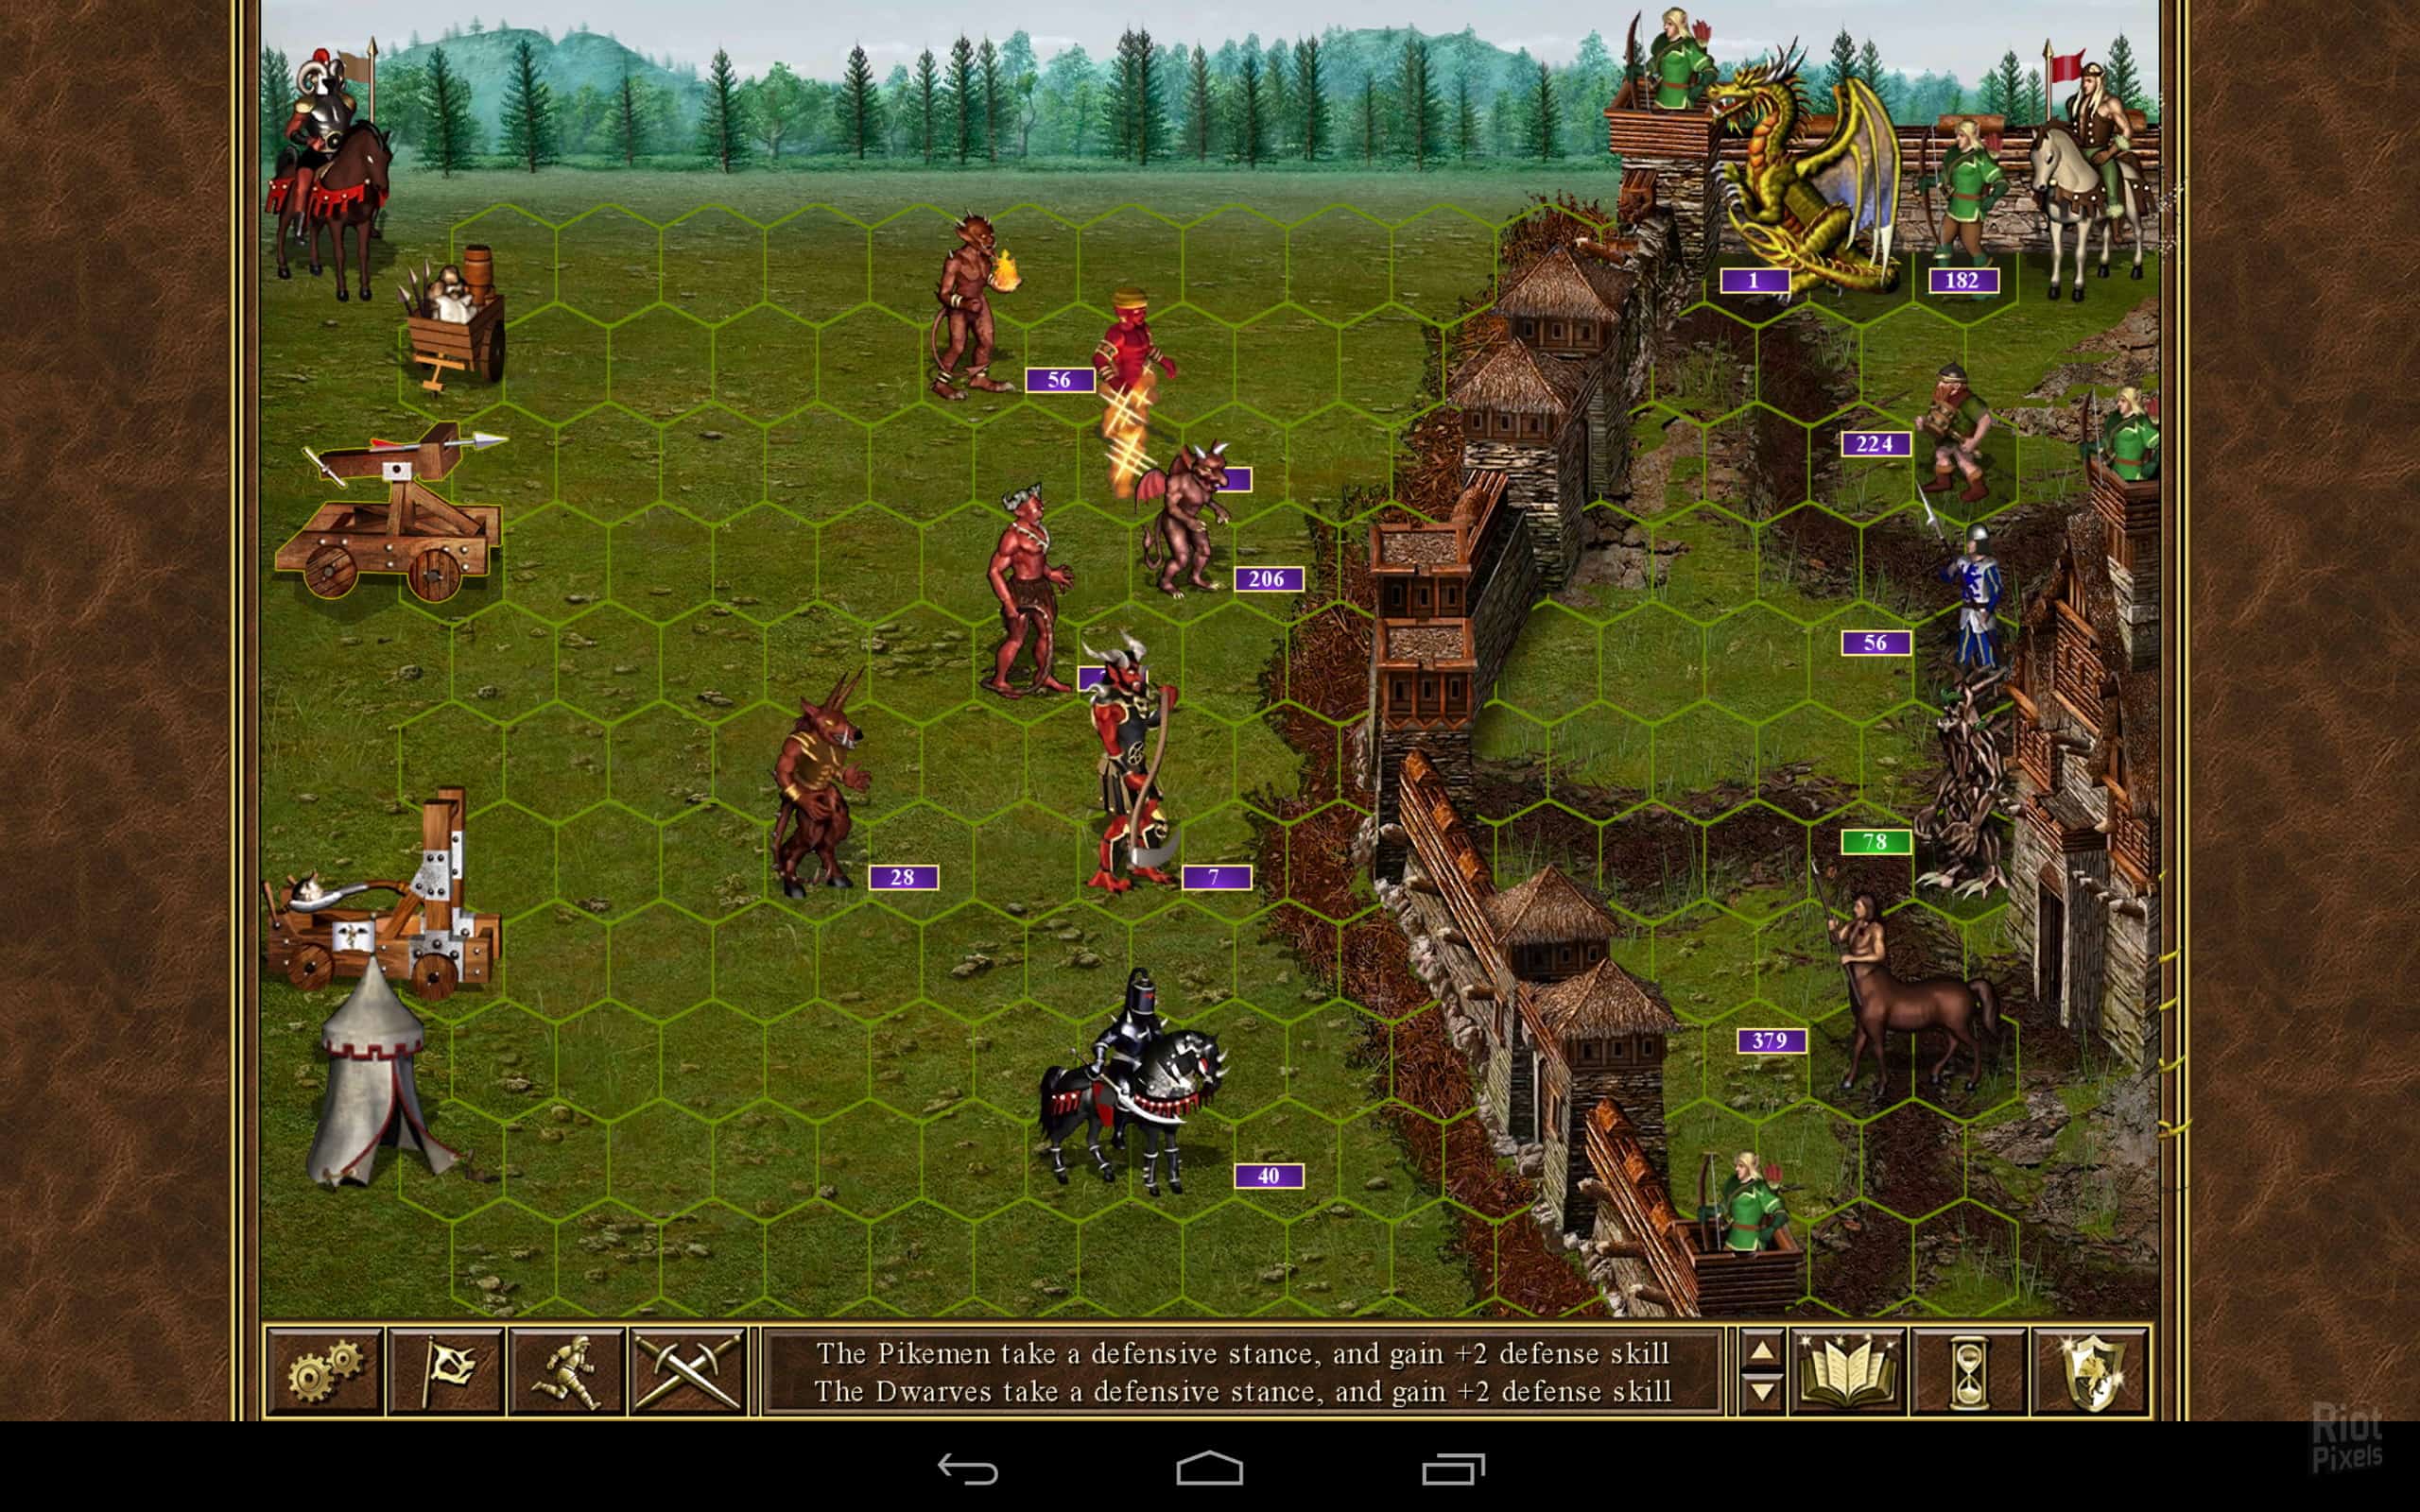 heroes of might and magic iii online download